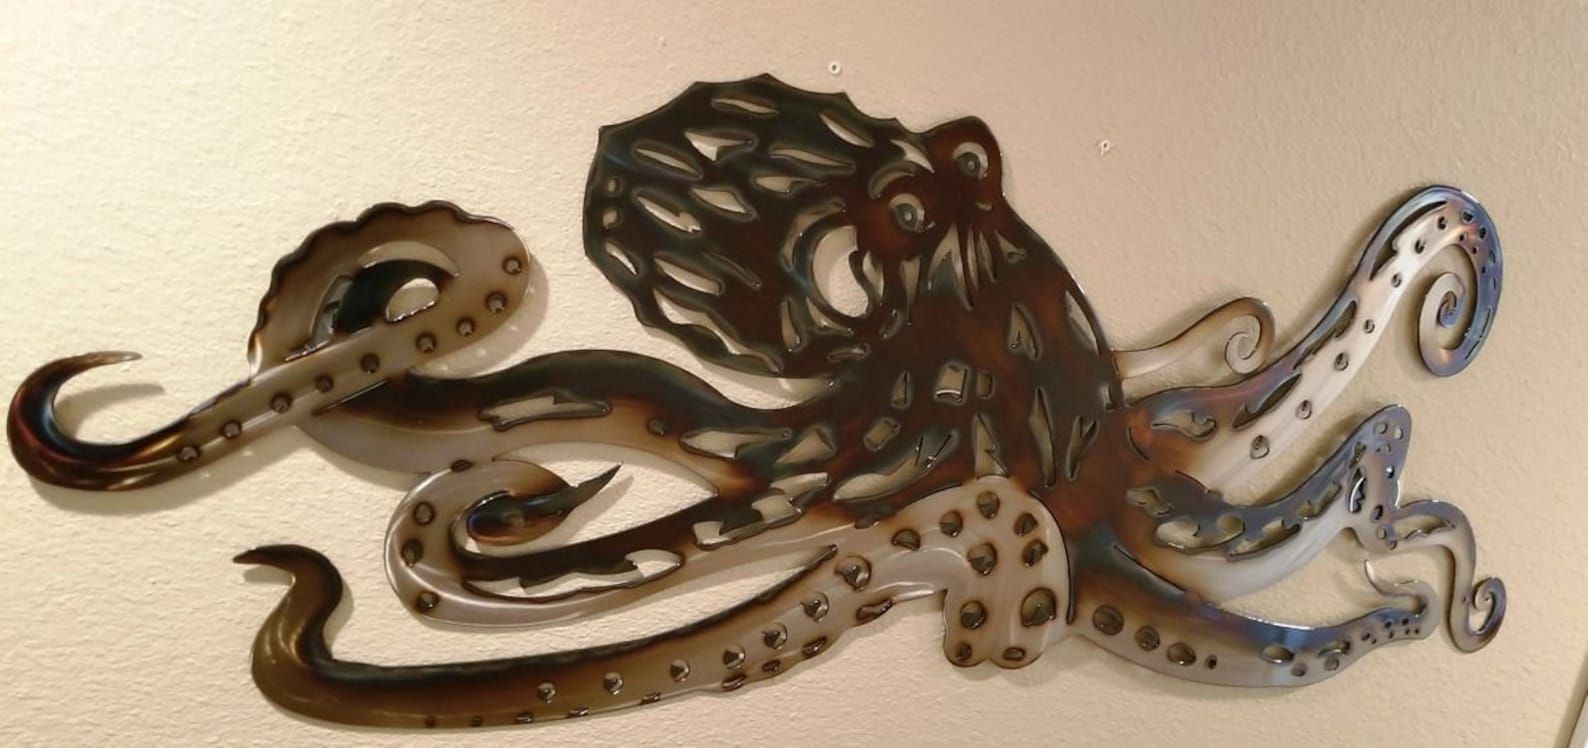 Octopus Kraken Torched Metal Wall Art | Etsy Throughout Most Recently Released Octopus Metal Wall Sculptures (View 7 of 20)